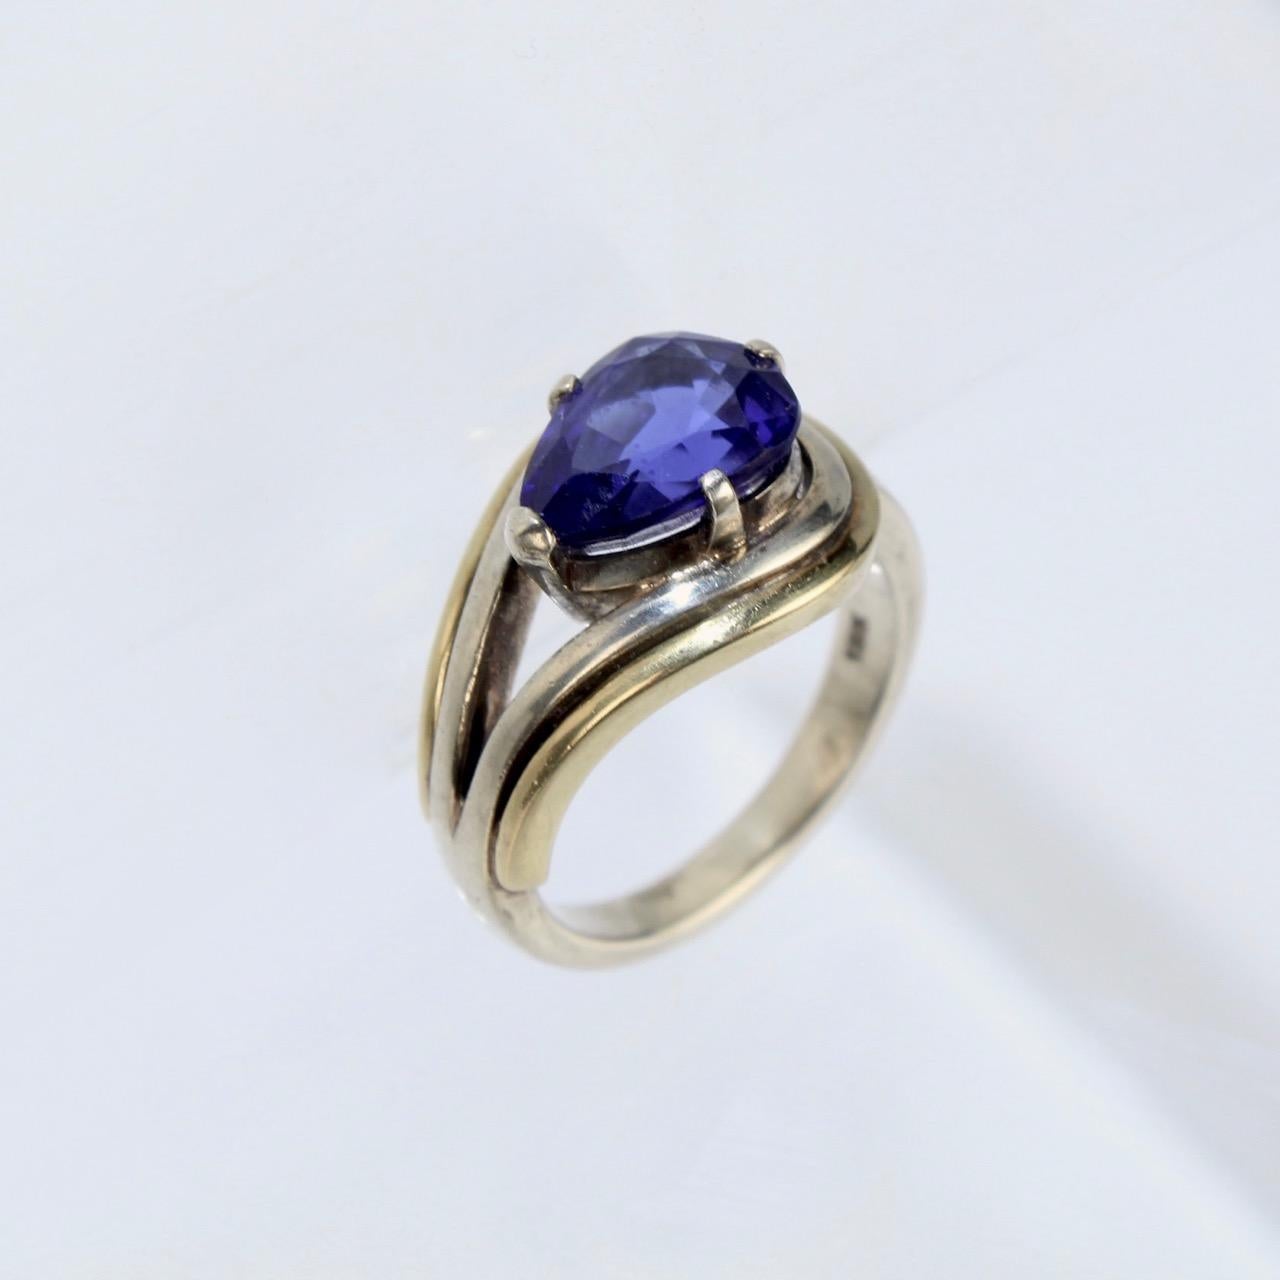 A fine modernist cocktail ring. 

In sterling silver with 18k gold elements.

Set with a pear cut dark blue tourmaline gemstone.

Simply wonderful design!

Date:
20th Century

Overall Condition:
It is in overall good, as-pictured, used estate